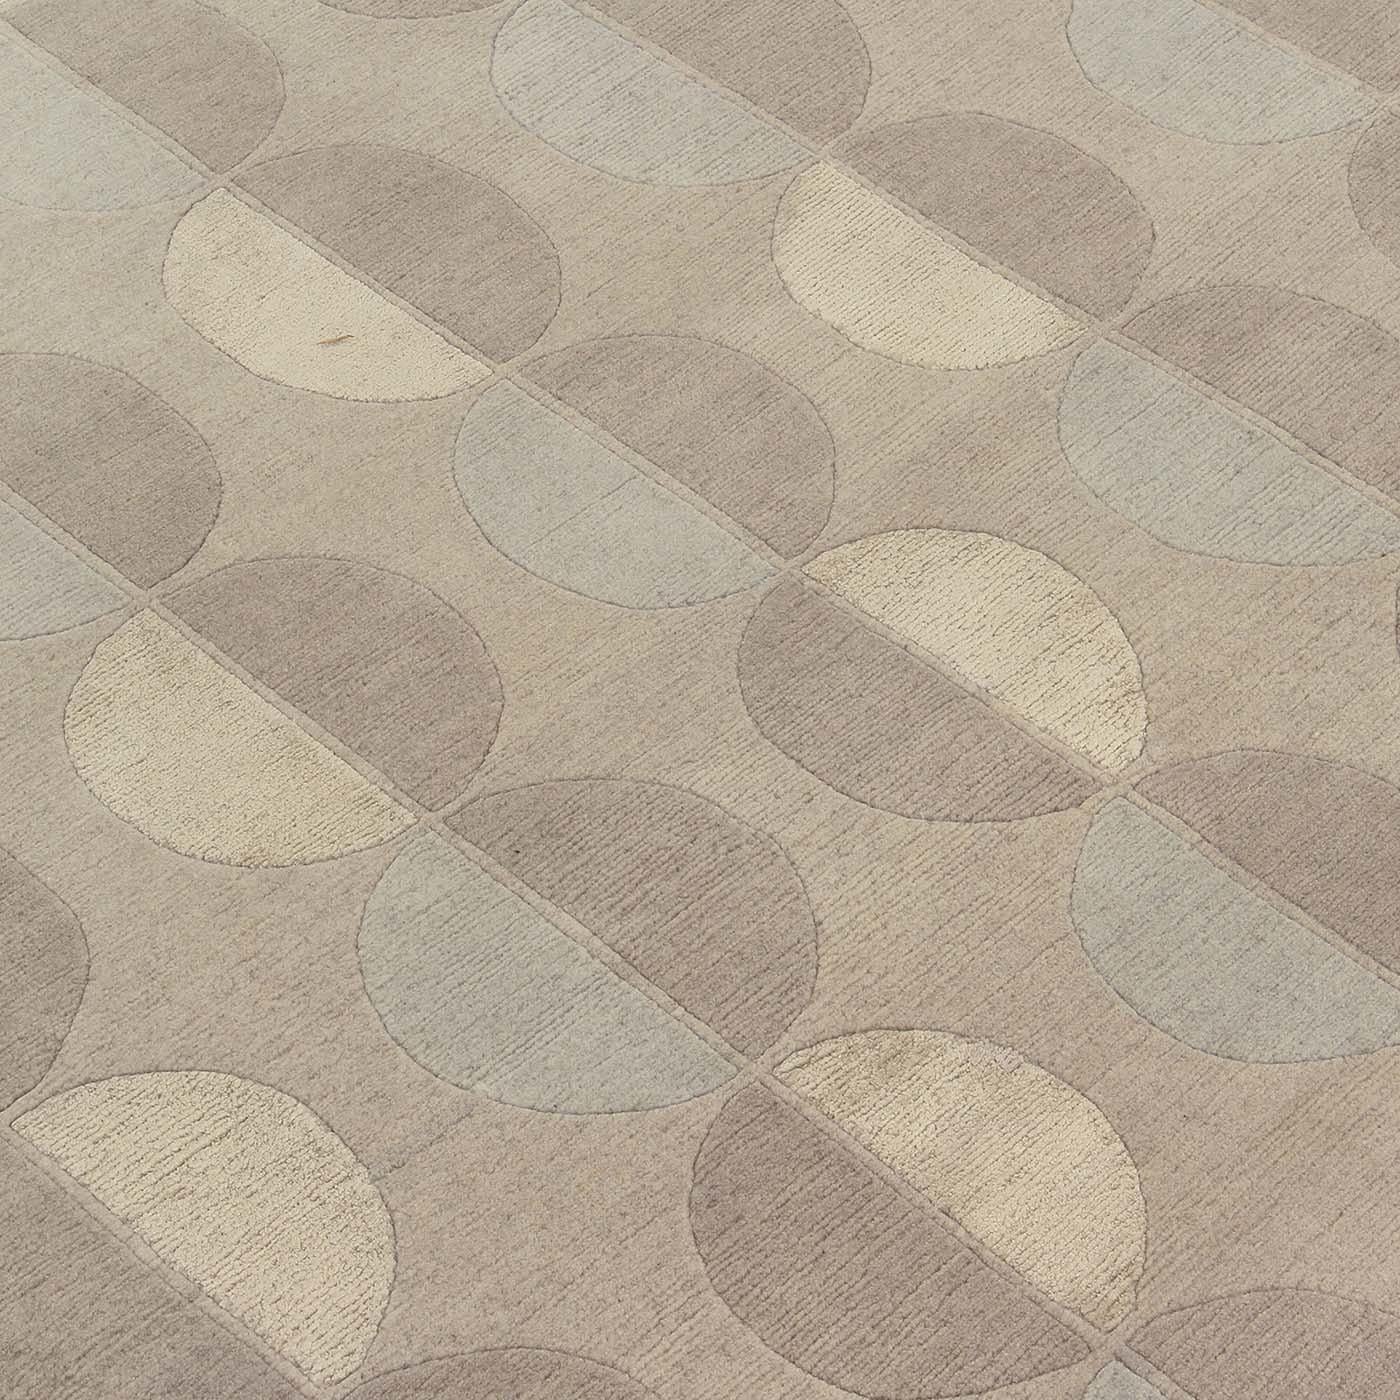 The hallmarks of Sole and Luna are the rows of hemispheres given by the play of light and shadows complemented by the solids and voids. From a Gio Ponti’s design, this carpet (300 x 250cm) is made of Tibetan wool and natural silk, bringing harmony